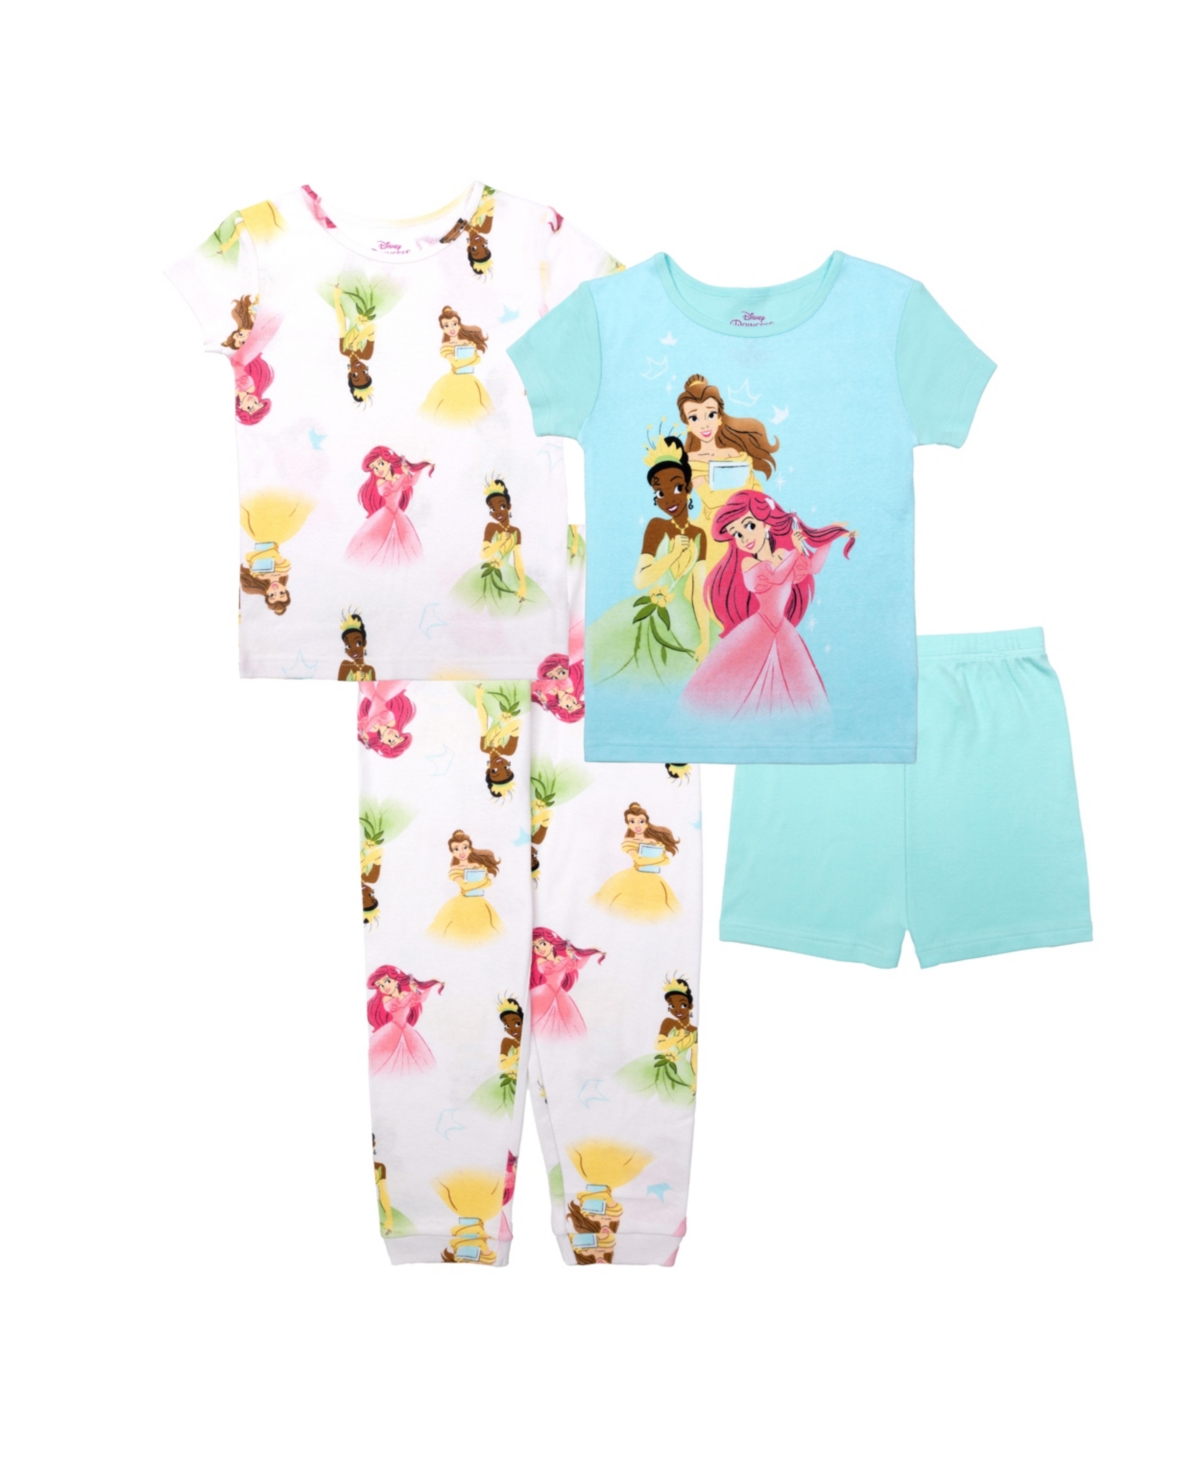 Shop Disney Princess Little Girls Top And Pajama, 4 Piece Set In Assorted